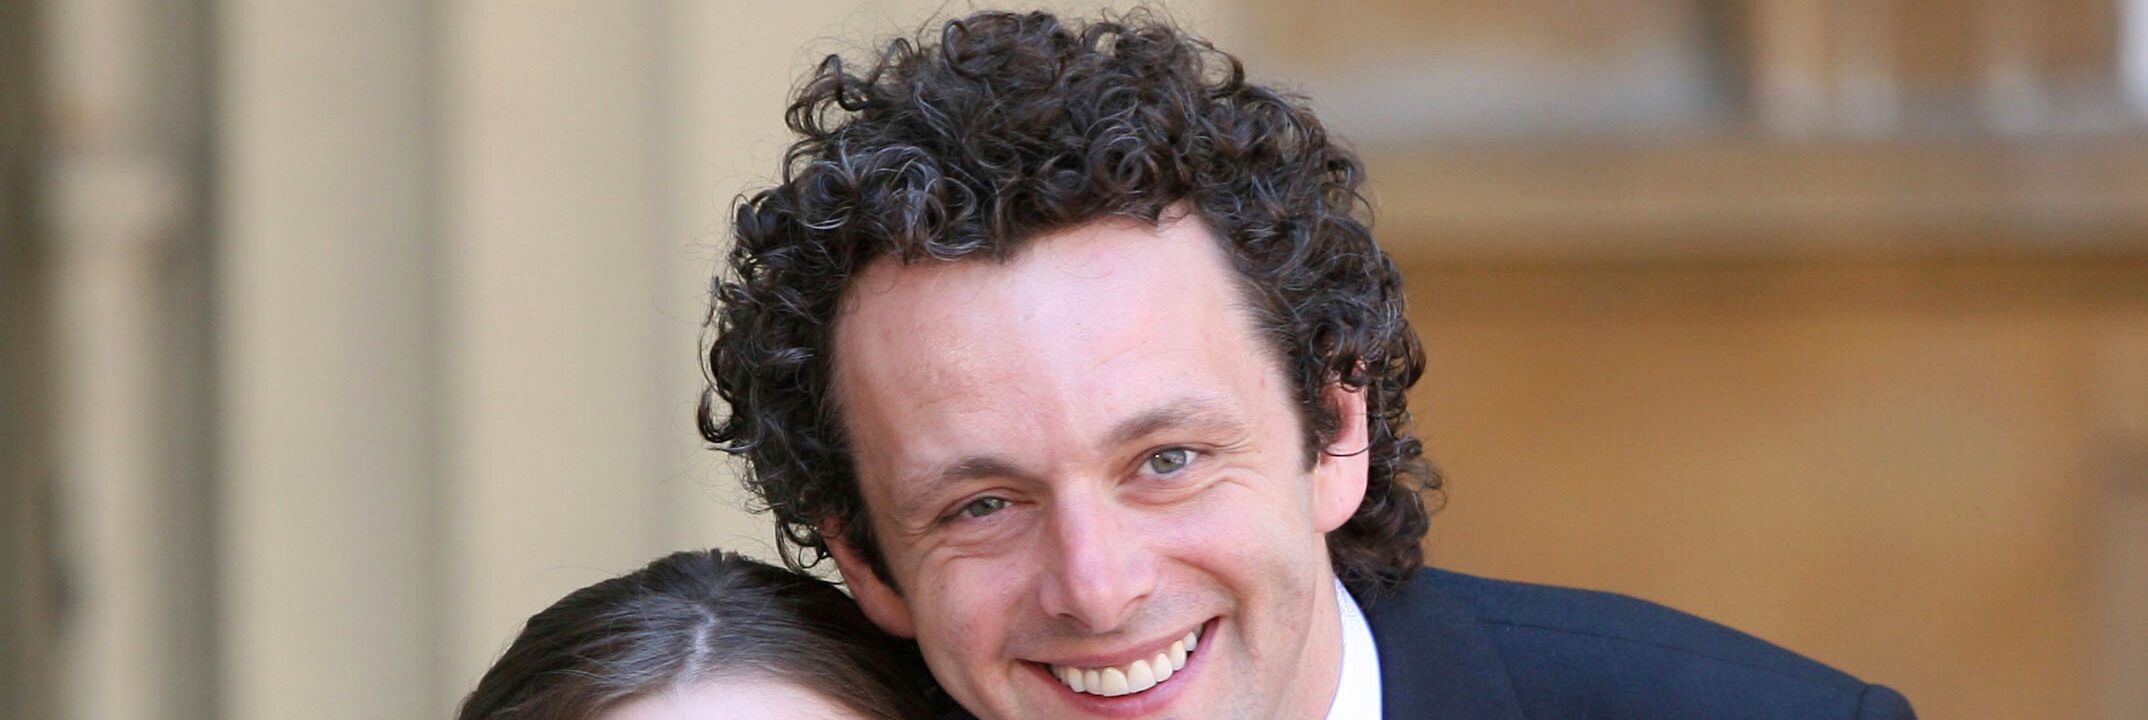 Michael Sheen and his daughter Lily with the Order of the British Empire he received from Queen Elizabeth II during investitures at Buckingham Palace on June 2, 2009.